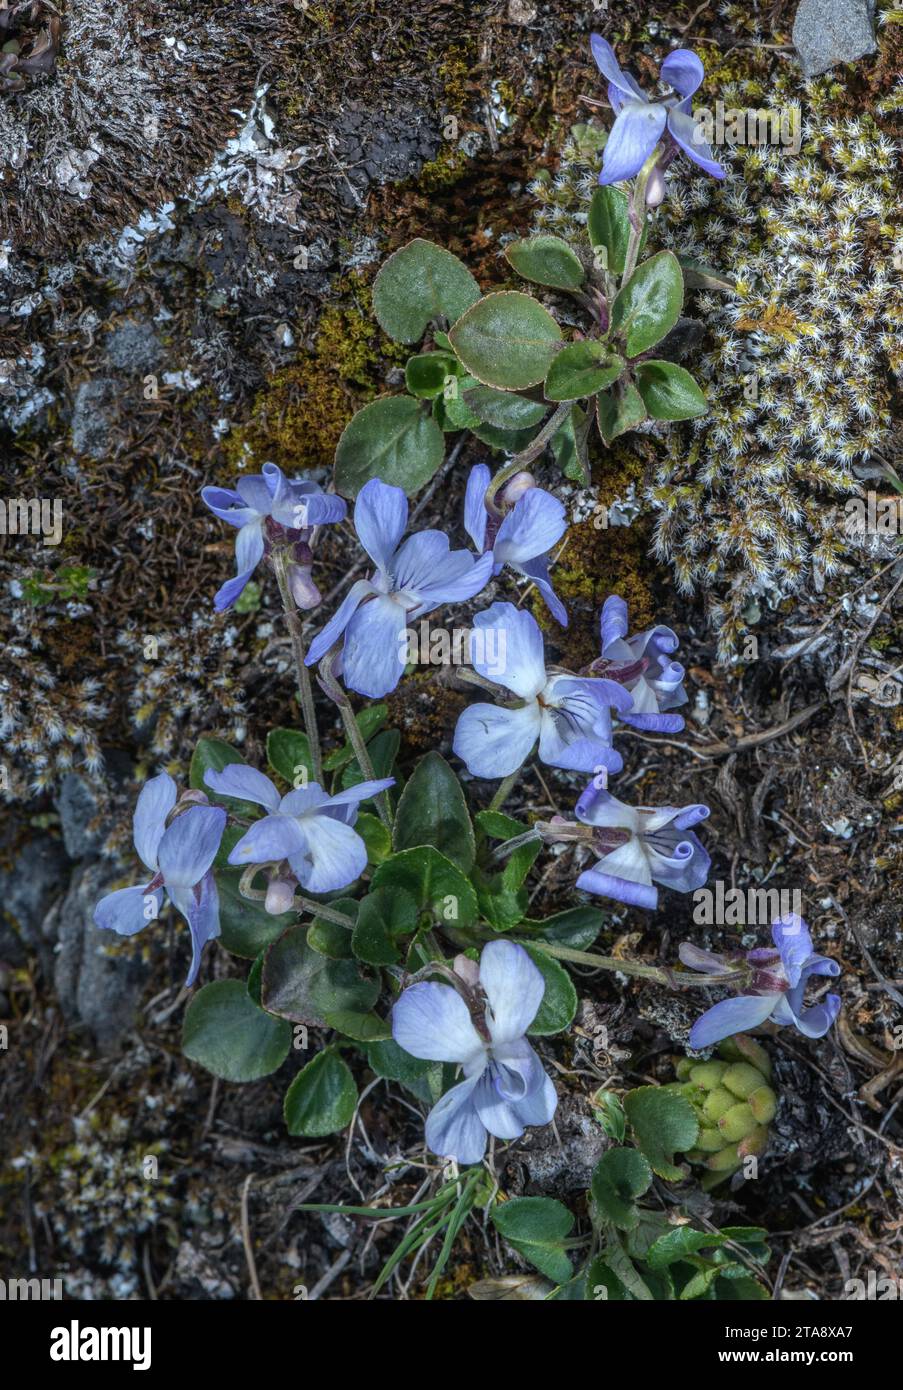 Teesdale Violet, Viola rupestris, in flower in the Swiss Alps. Stock Photo